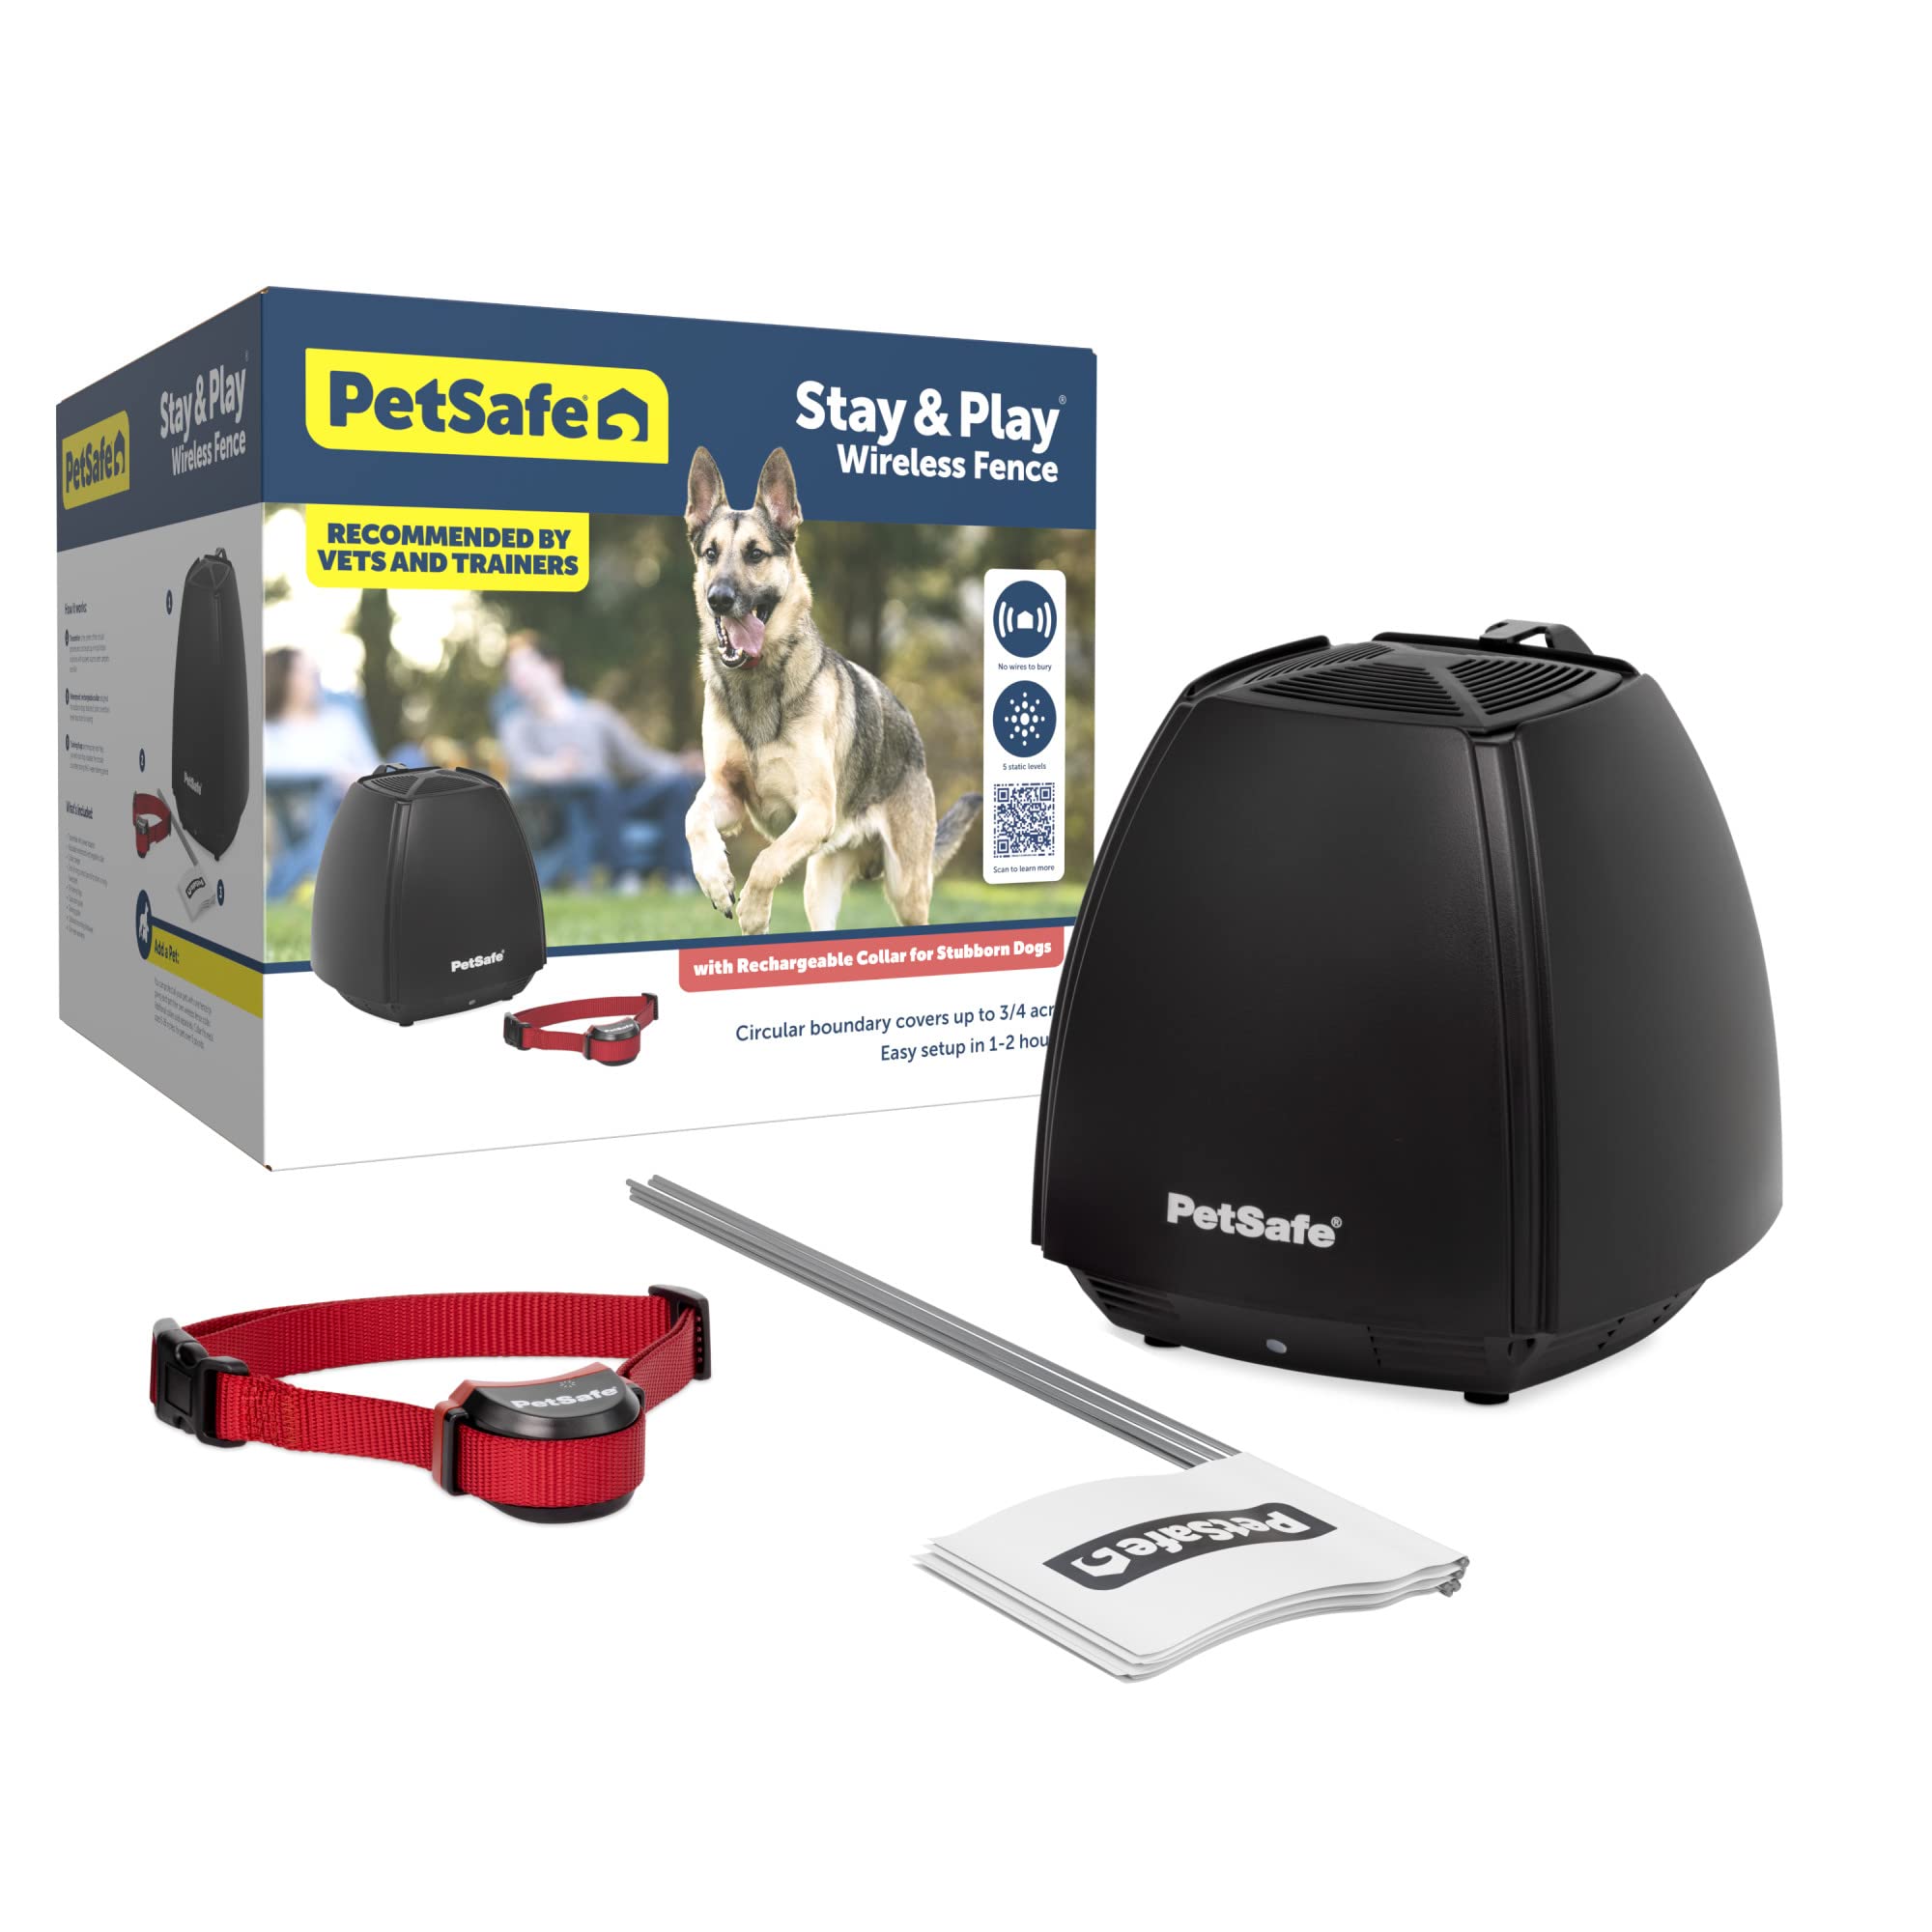 PetSafe Stay & Play Wireless Pet Fence for Stubborn Dogs – No Wire to Bury – Covers 3/4-Acre Yard – For Hard-to-Train Dogs 5 lbs. & Up – Portable – From the Parent Company of INVISIBLE FENCE Brand